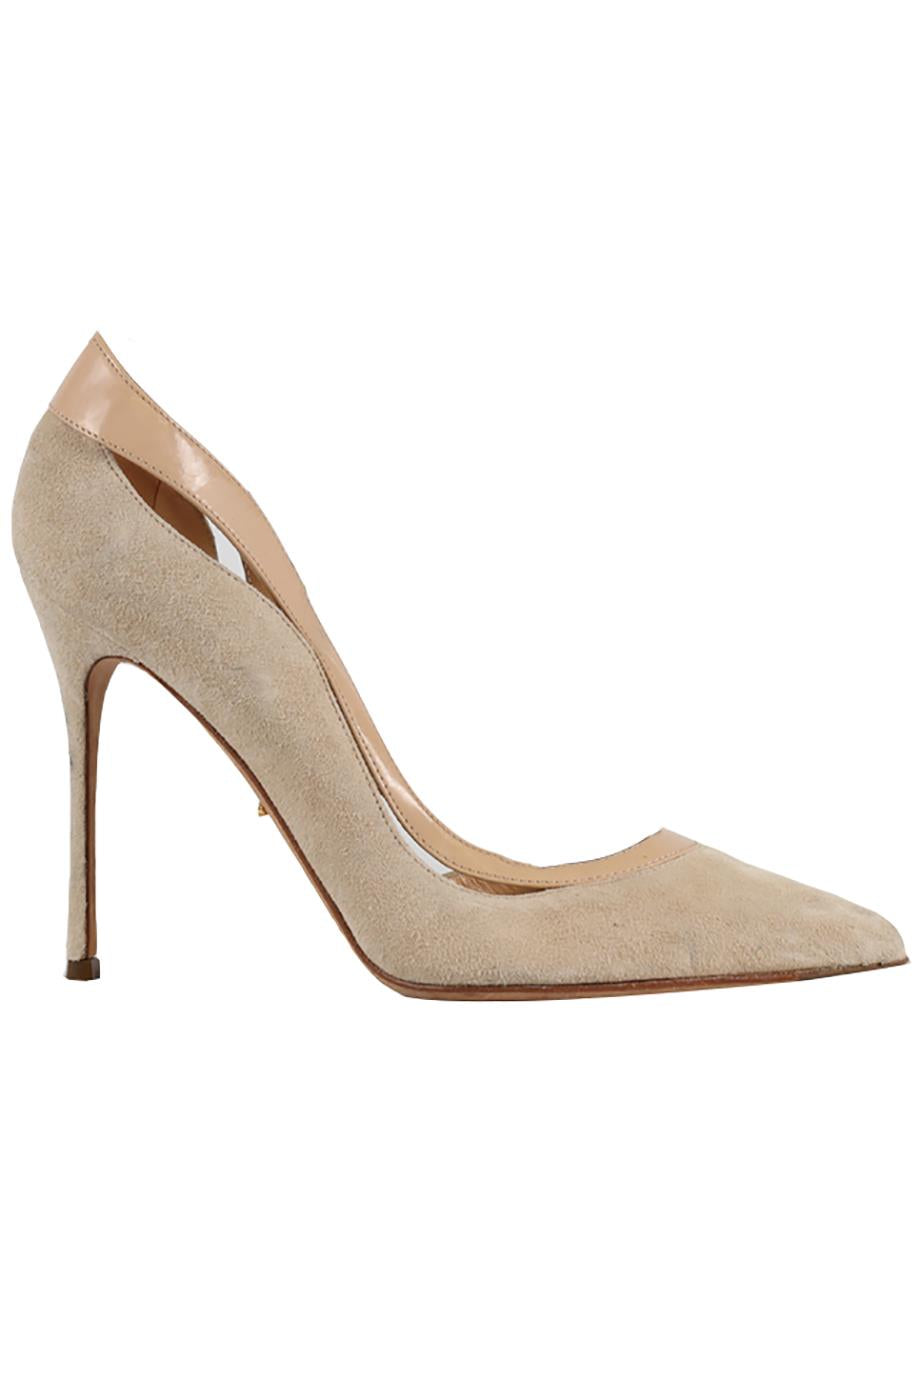 SERGIO ROSSI SUEDE AND LEATHER PUMPS EU 37.5 UK 4.5 US 7.5